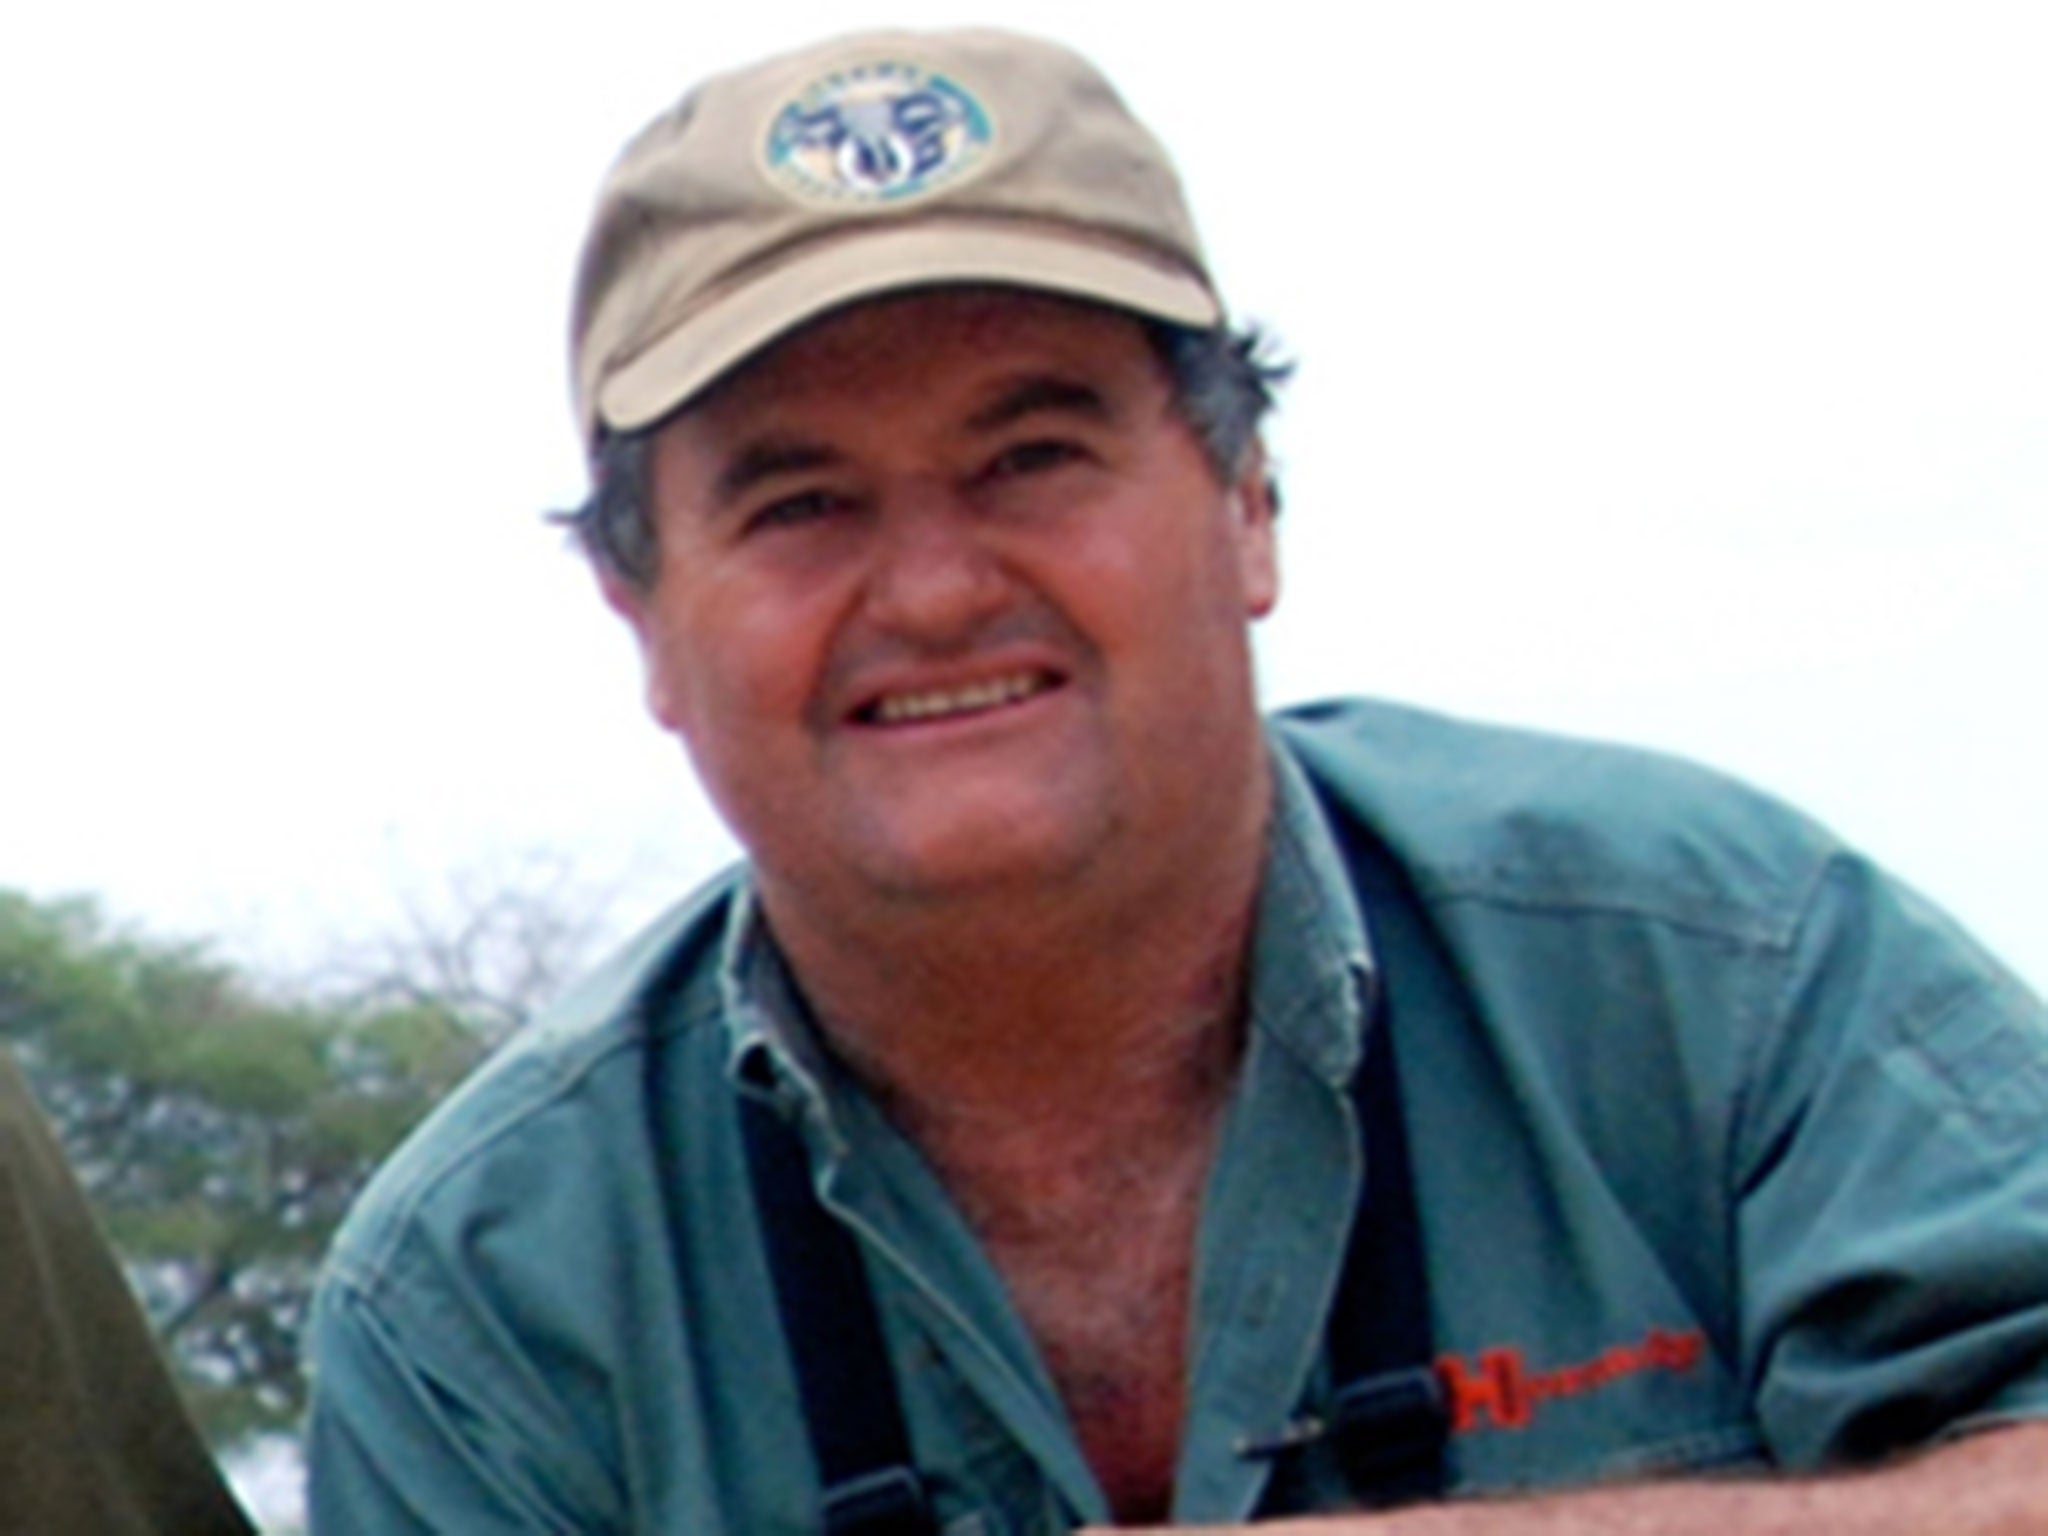 Ian Gibson was killed when an elephant charged at him during a hunt